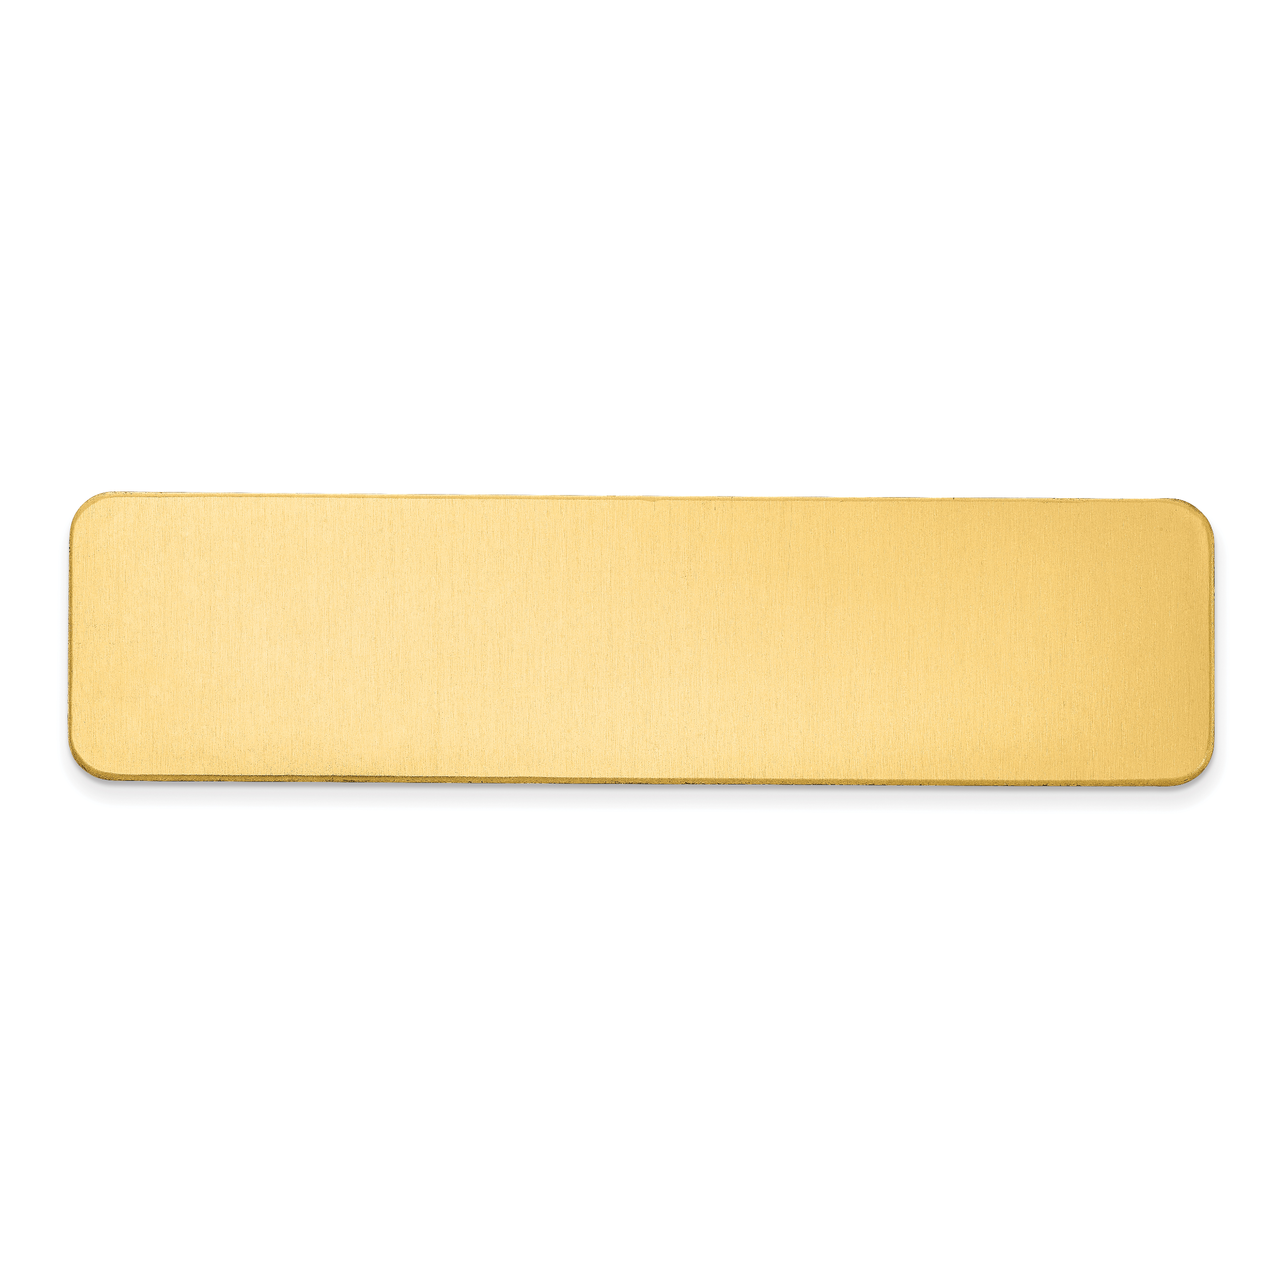 3 4 x 3 Brass Plates-Sets of 6 Polished by Jere Engravable